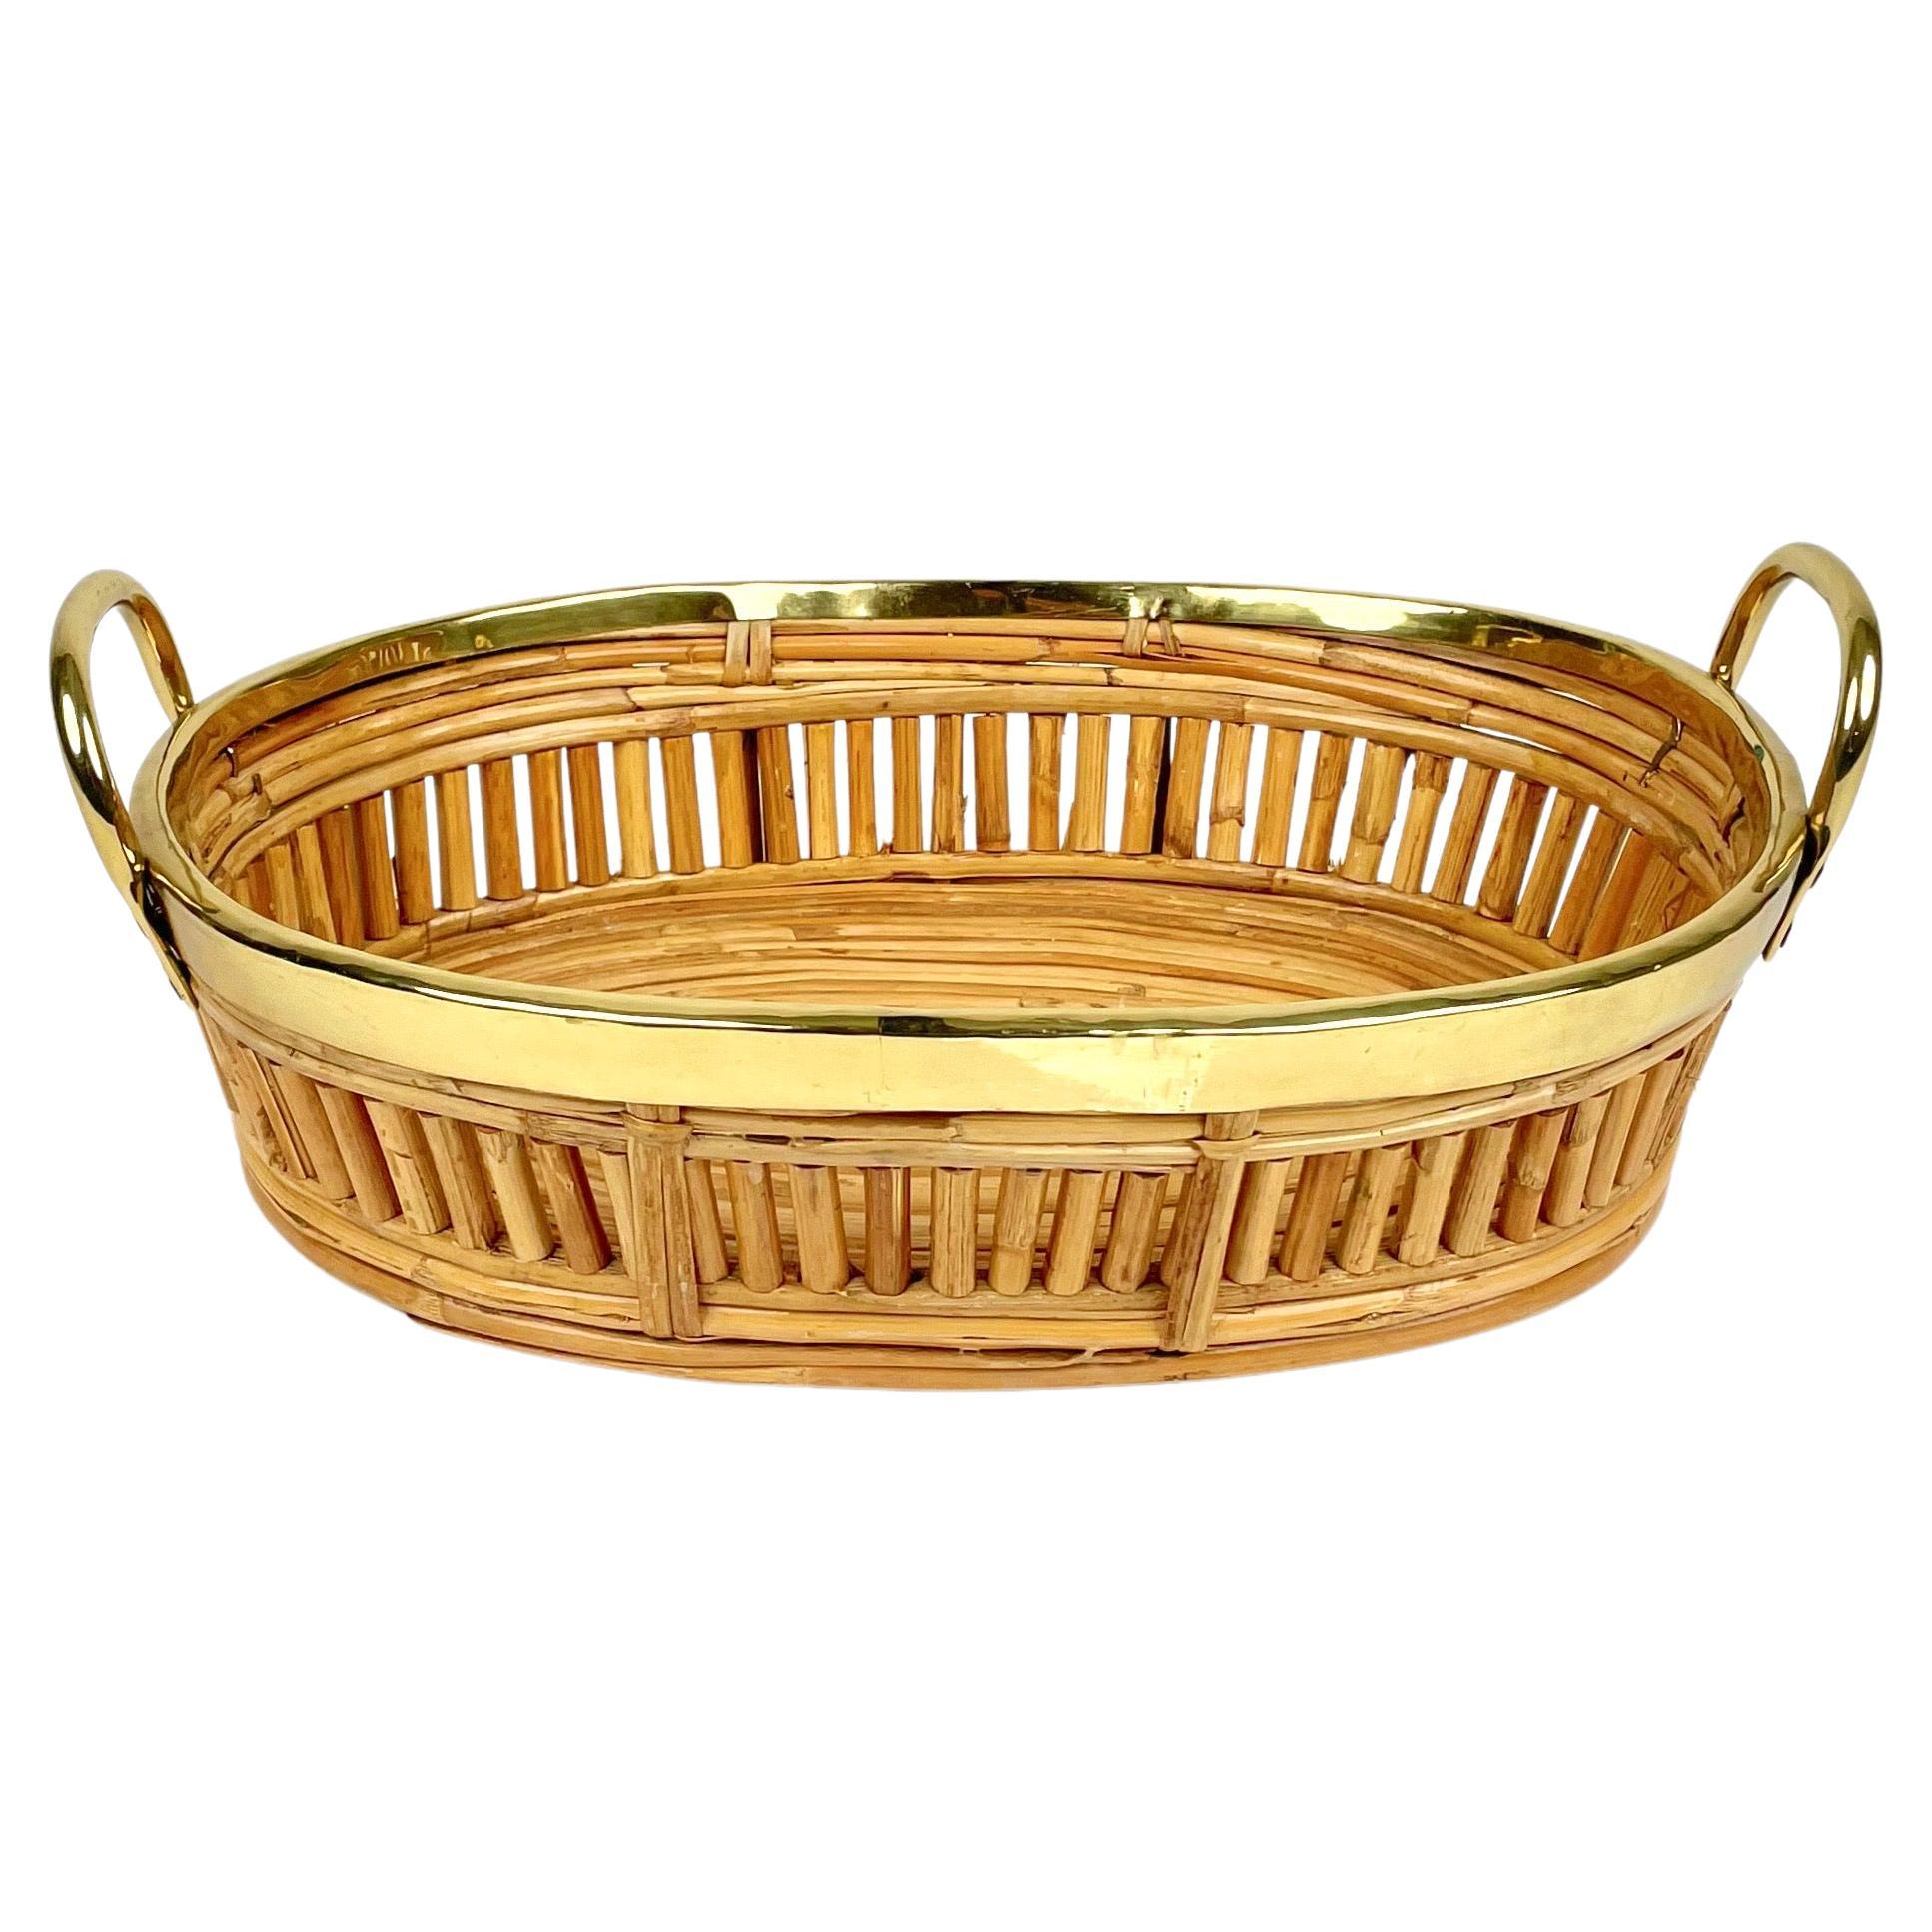 Midcentury Centerpiece Basket Rattan and Brass, Italy 1970s For Sale